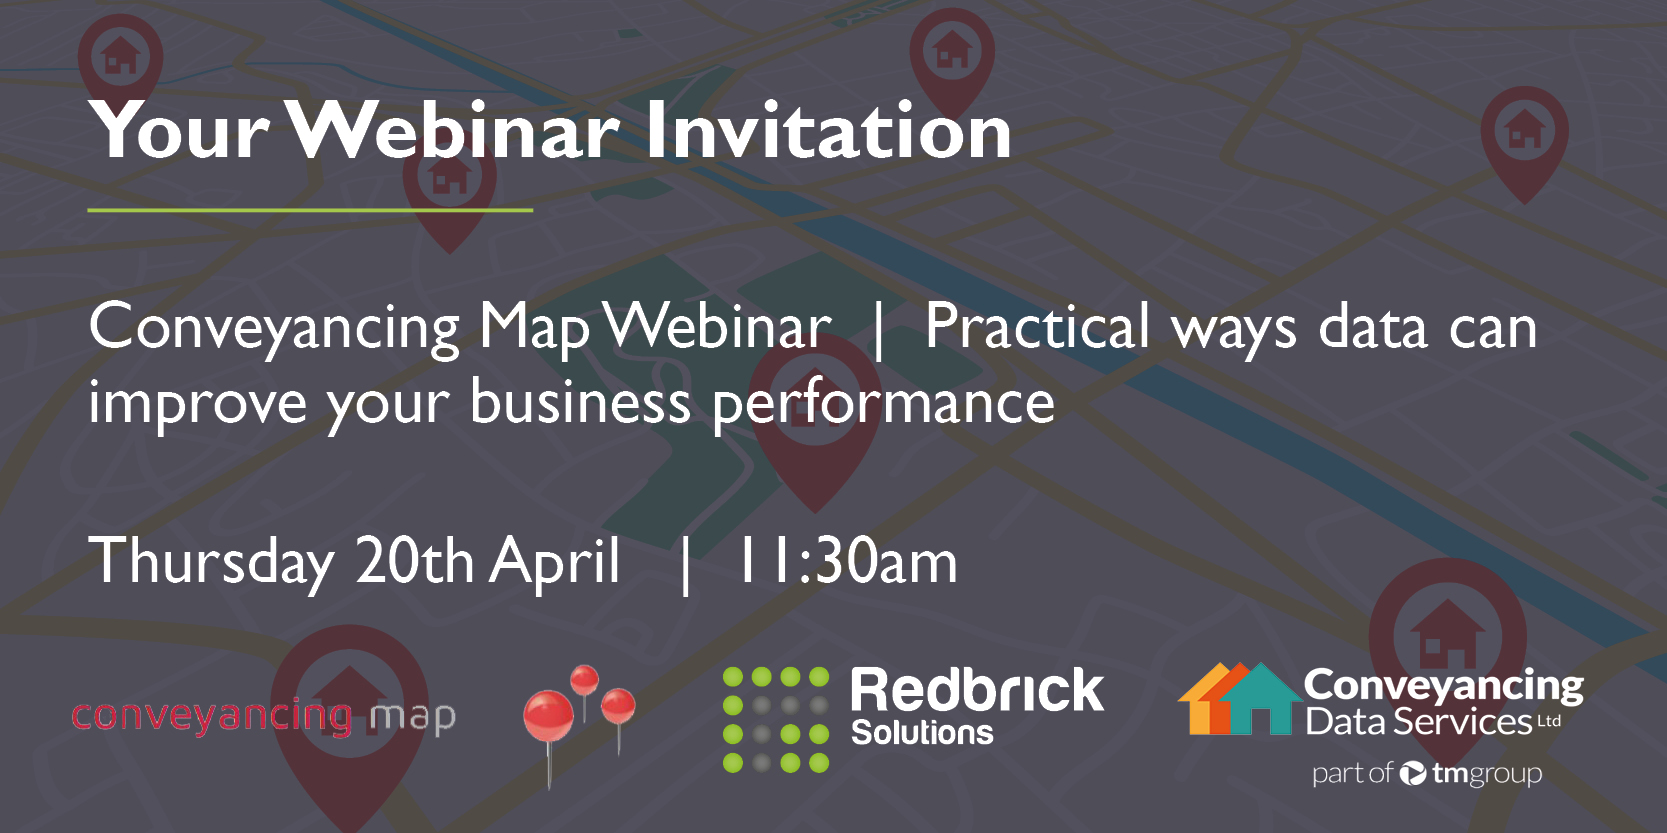 Conveyancing Map Webinar | Practical ways data can improve your business performance